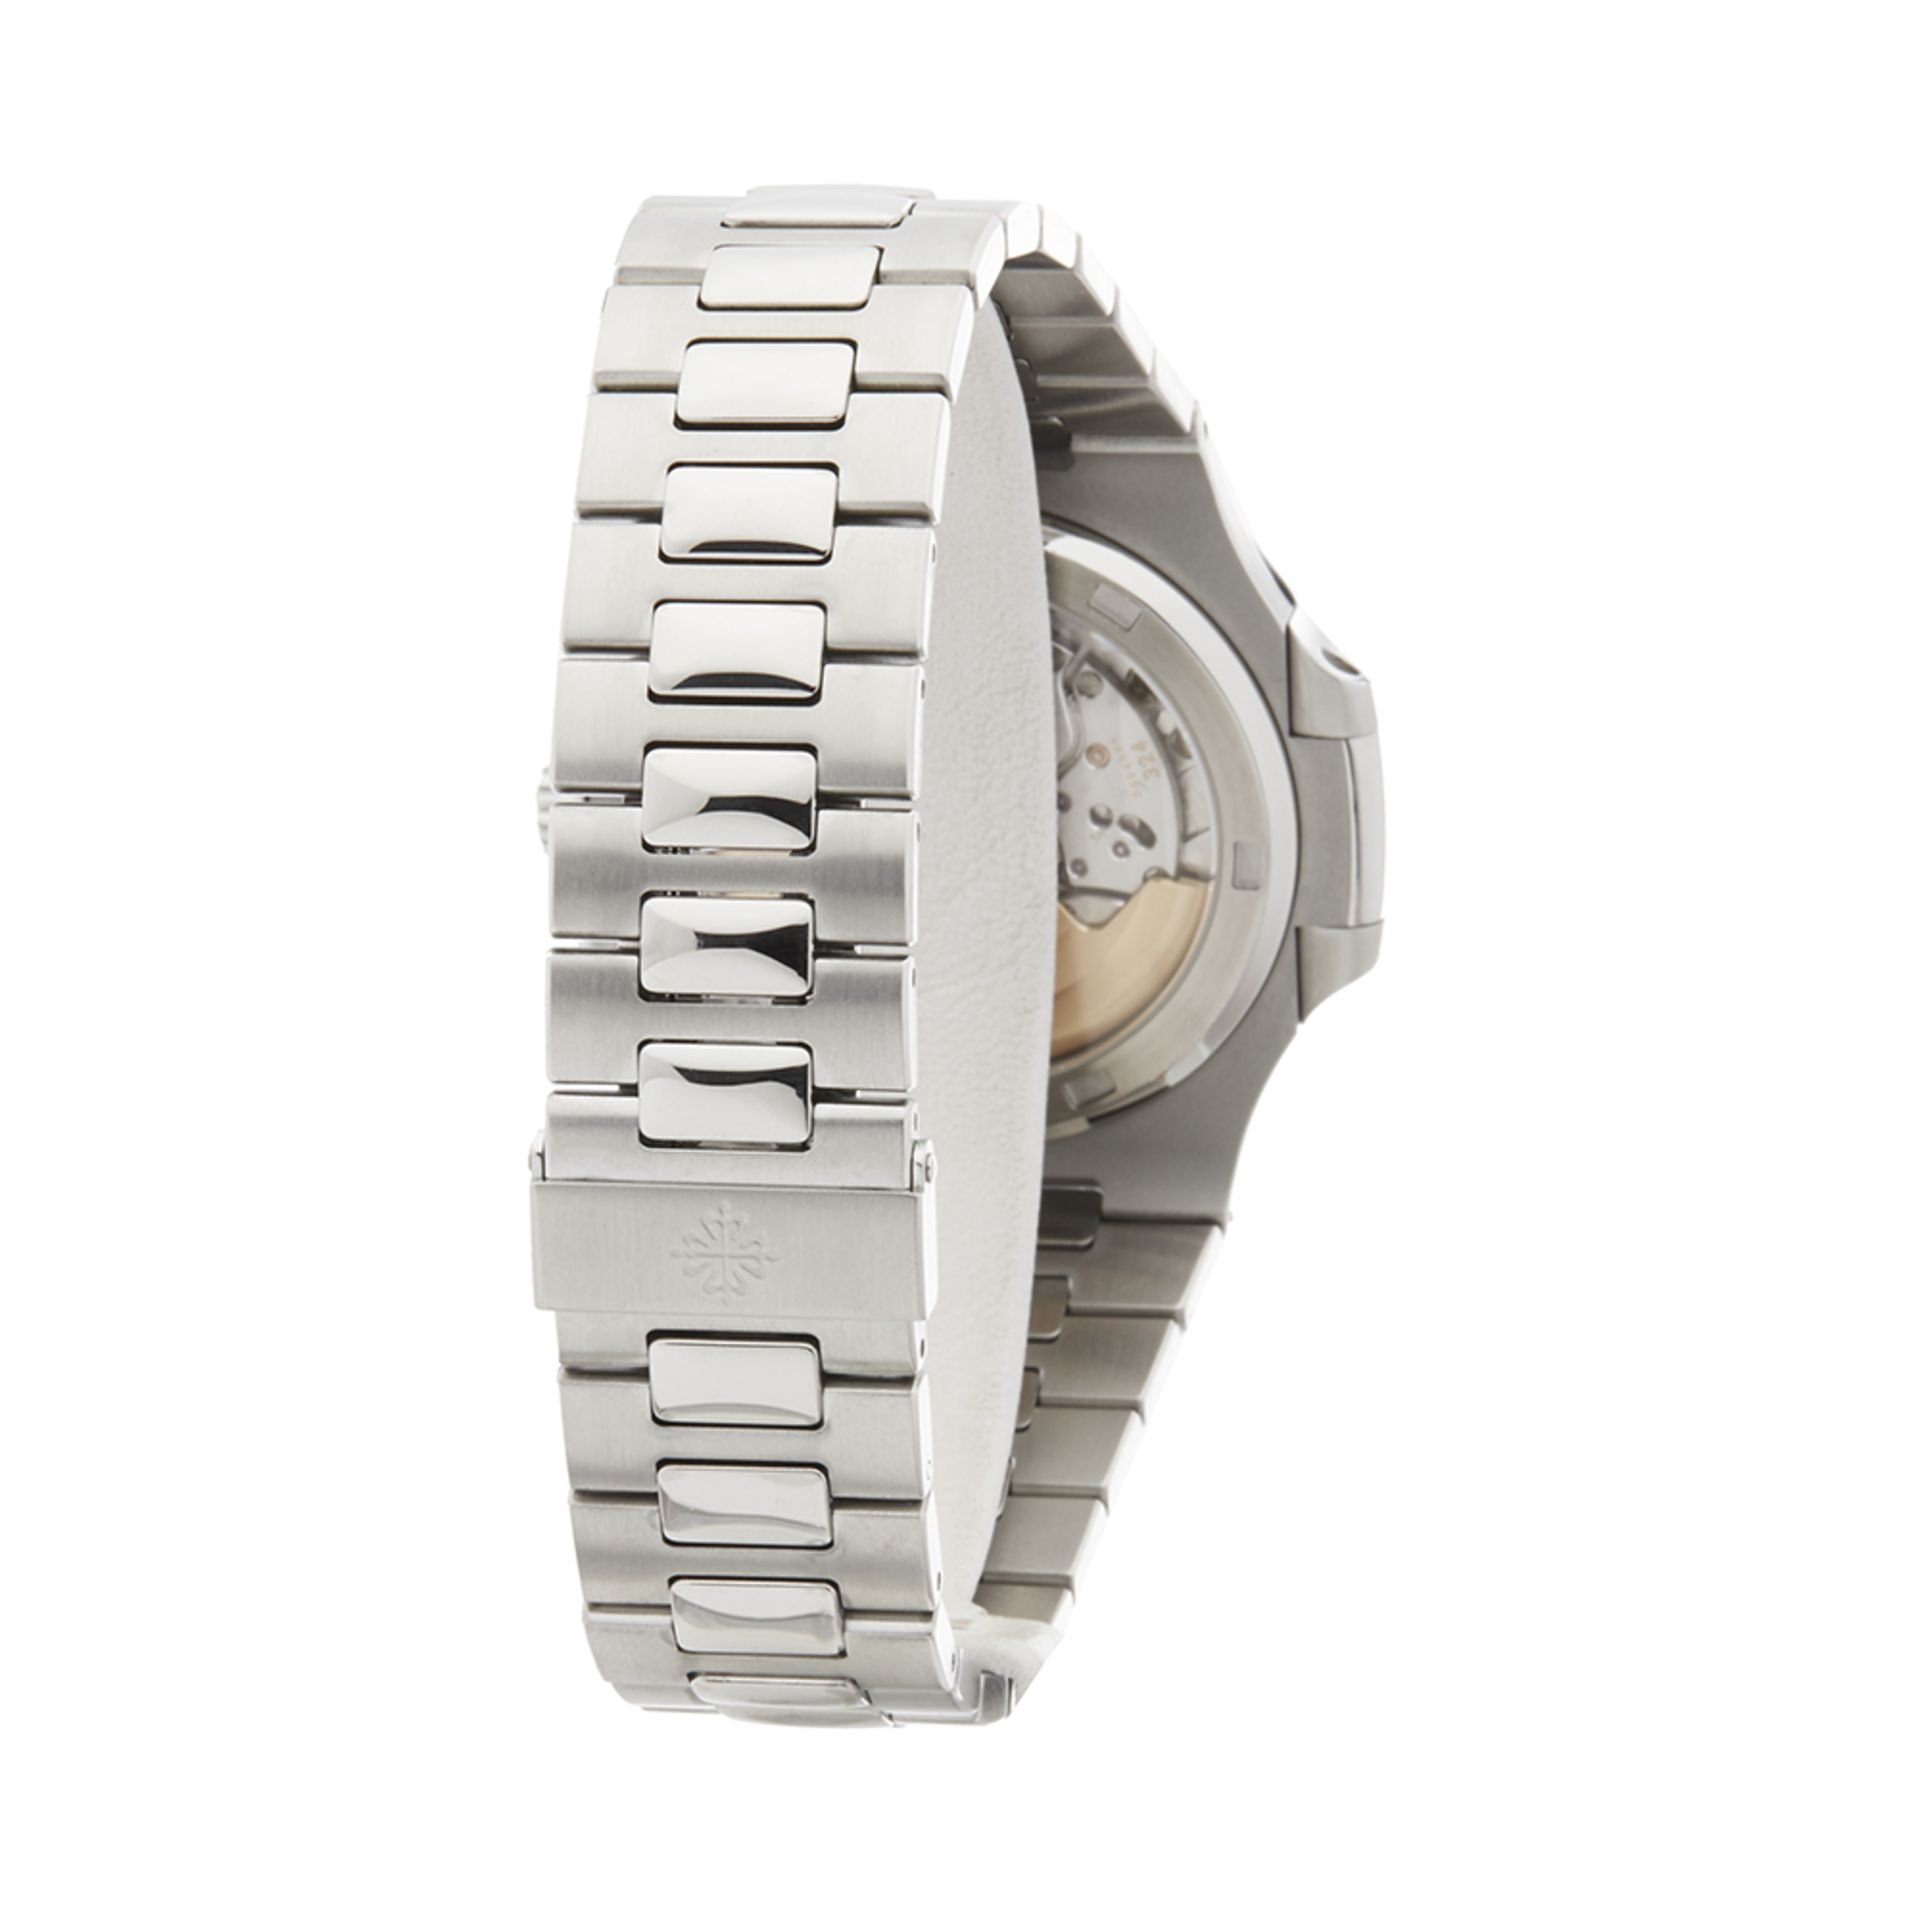 Patek Philippe Nautilus 40mm Stainless Steel - 5711 1A/011 - Image 6 of 8